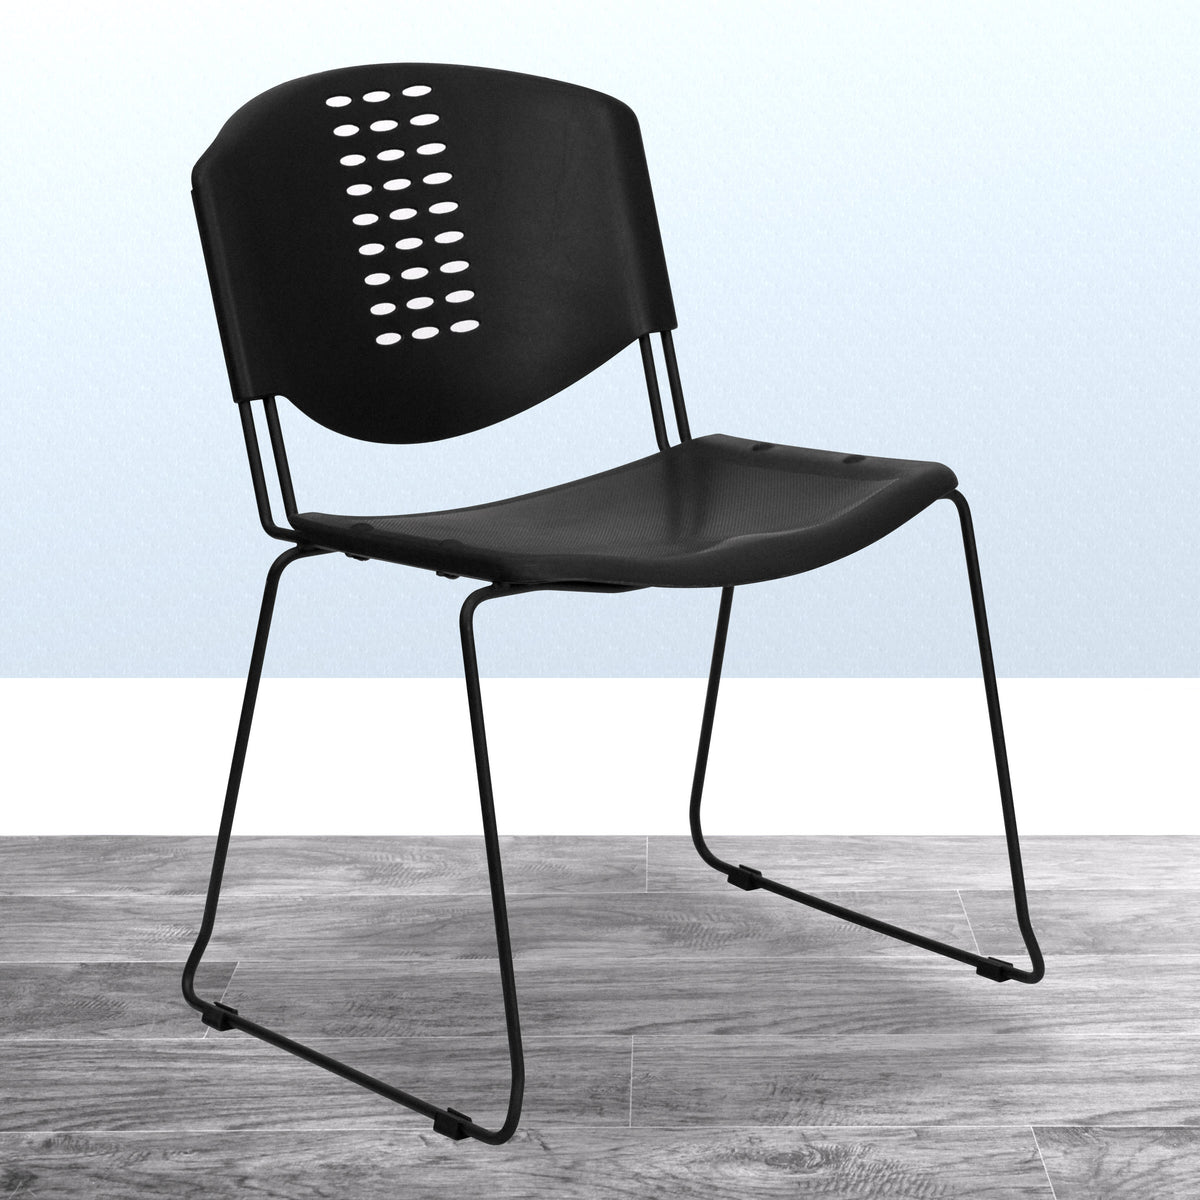 400 lb. Capacity Black Plastic Stack Chair with Black Frame and Textured Seat